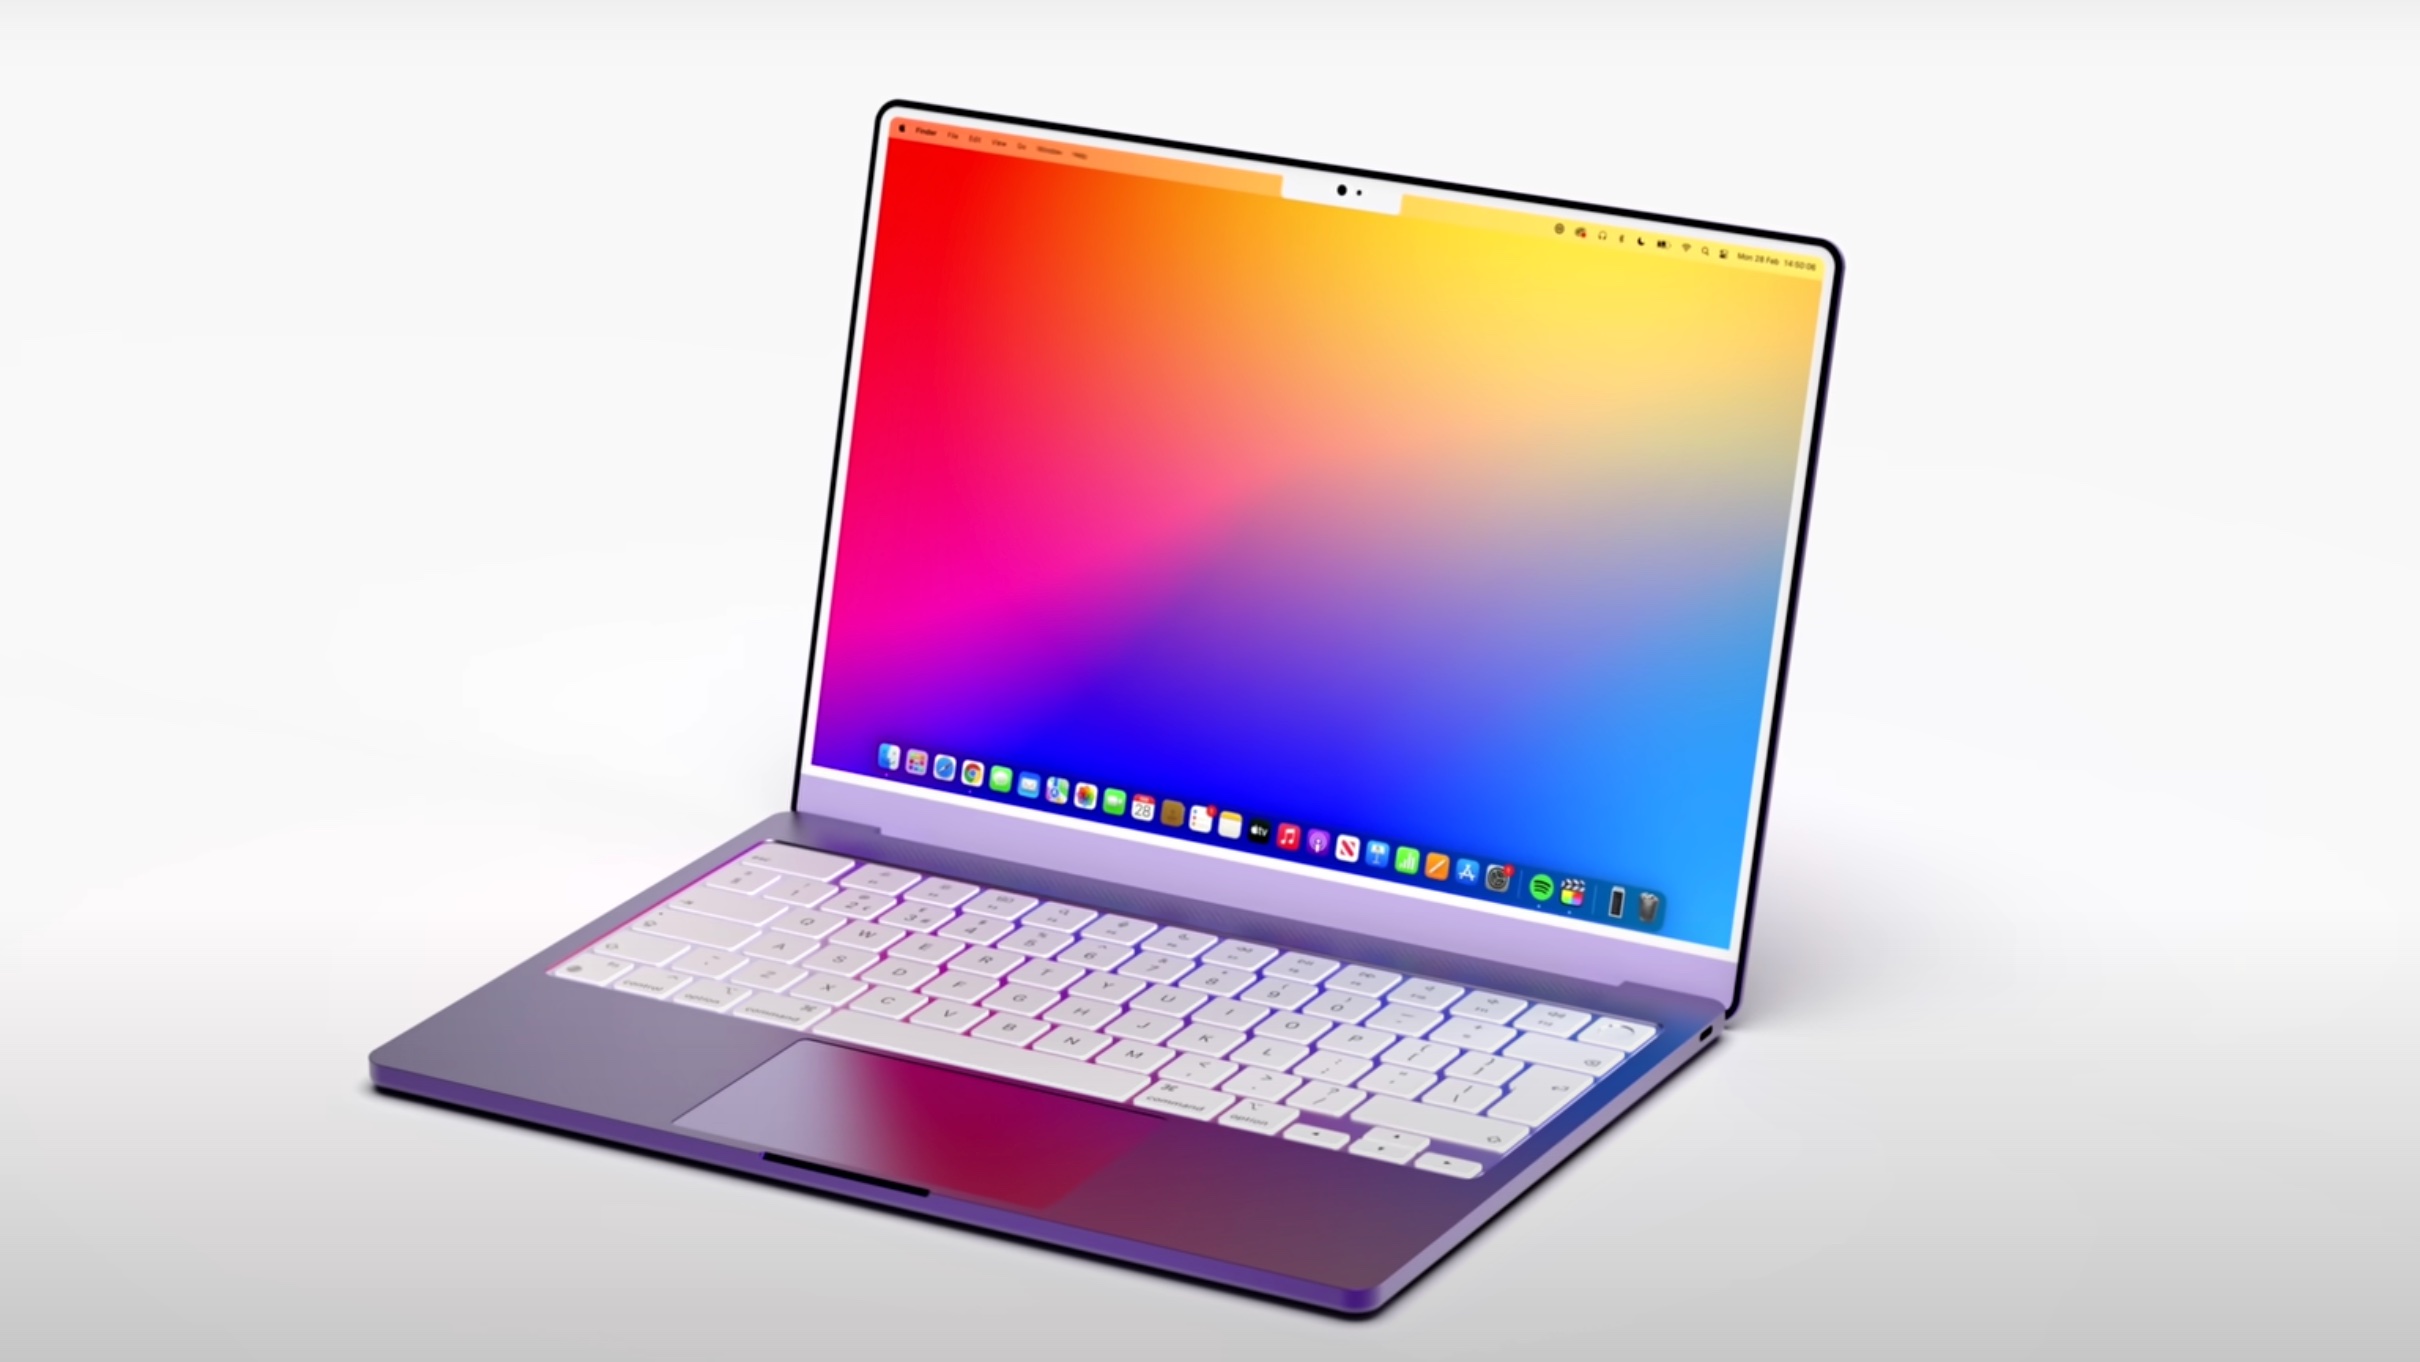 MacBook Air 2022 just got tipped for launch at WWDC